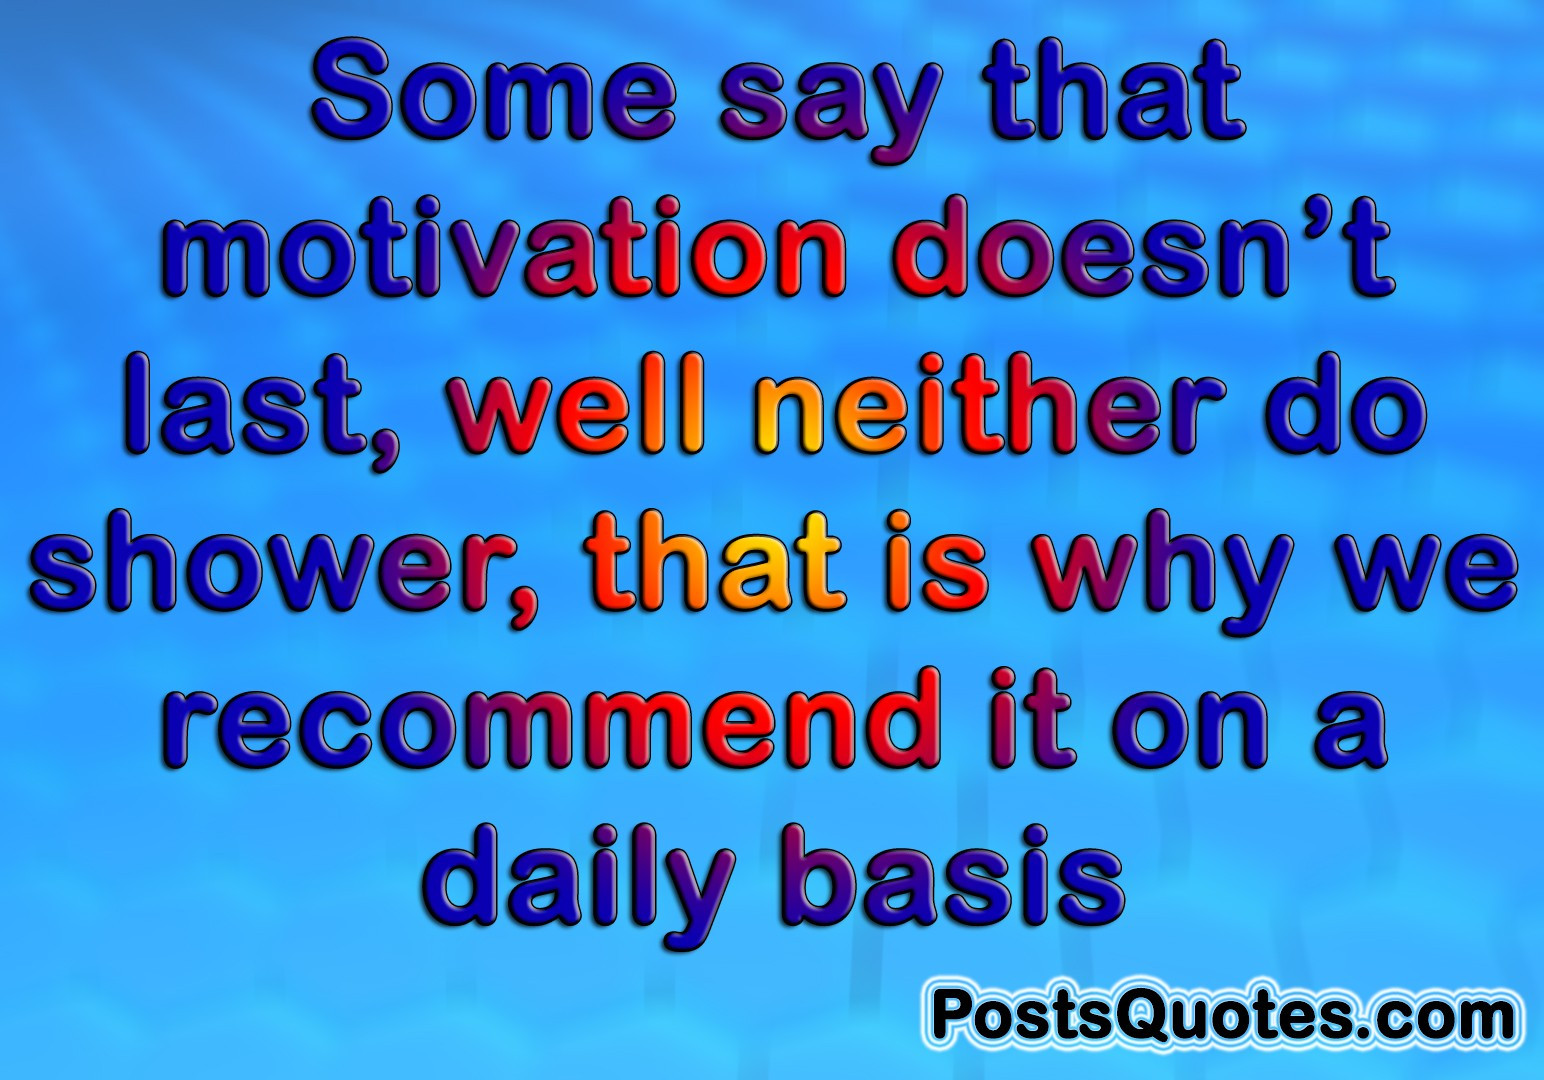 Motivational Quotes Daily
 Daily Motivational Quotes